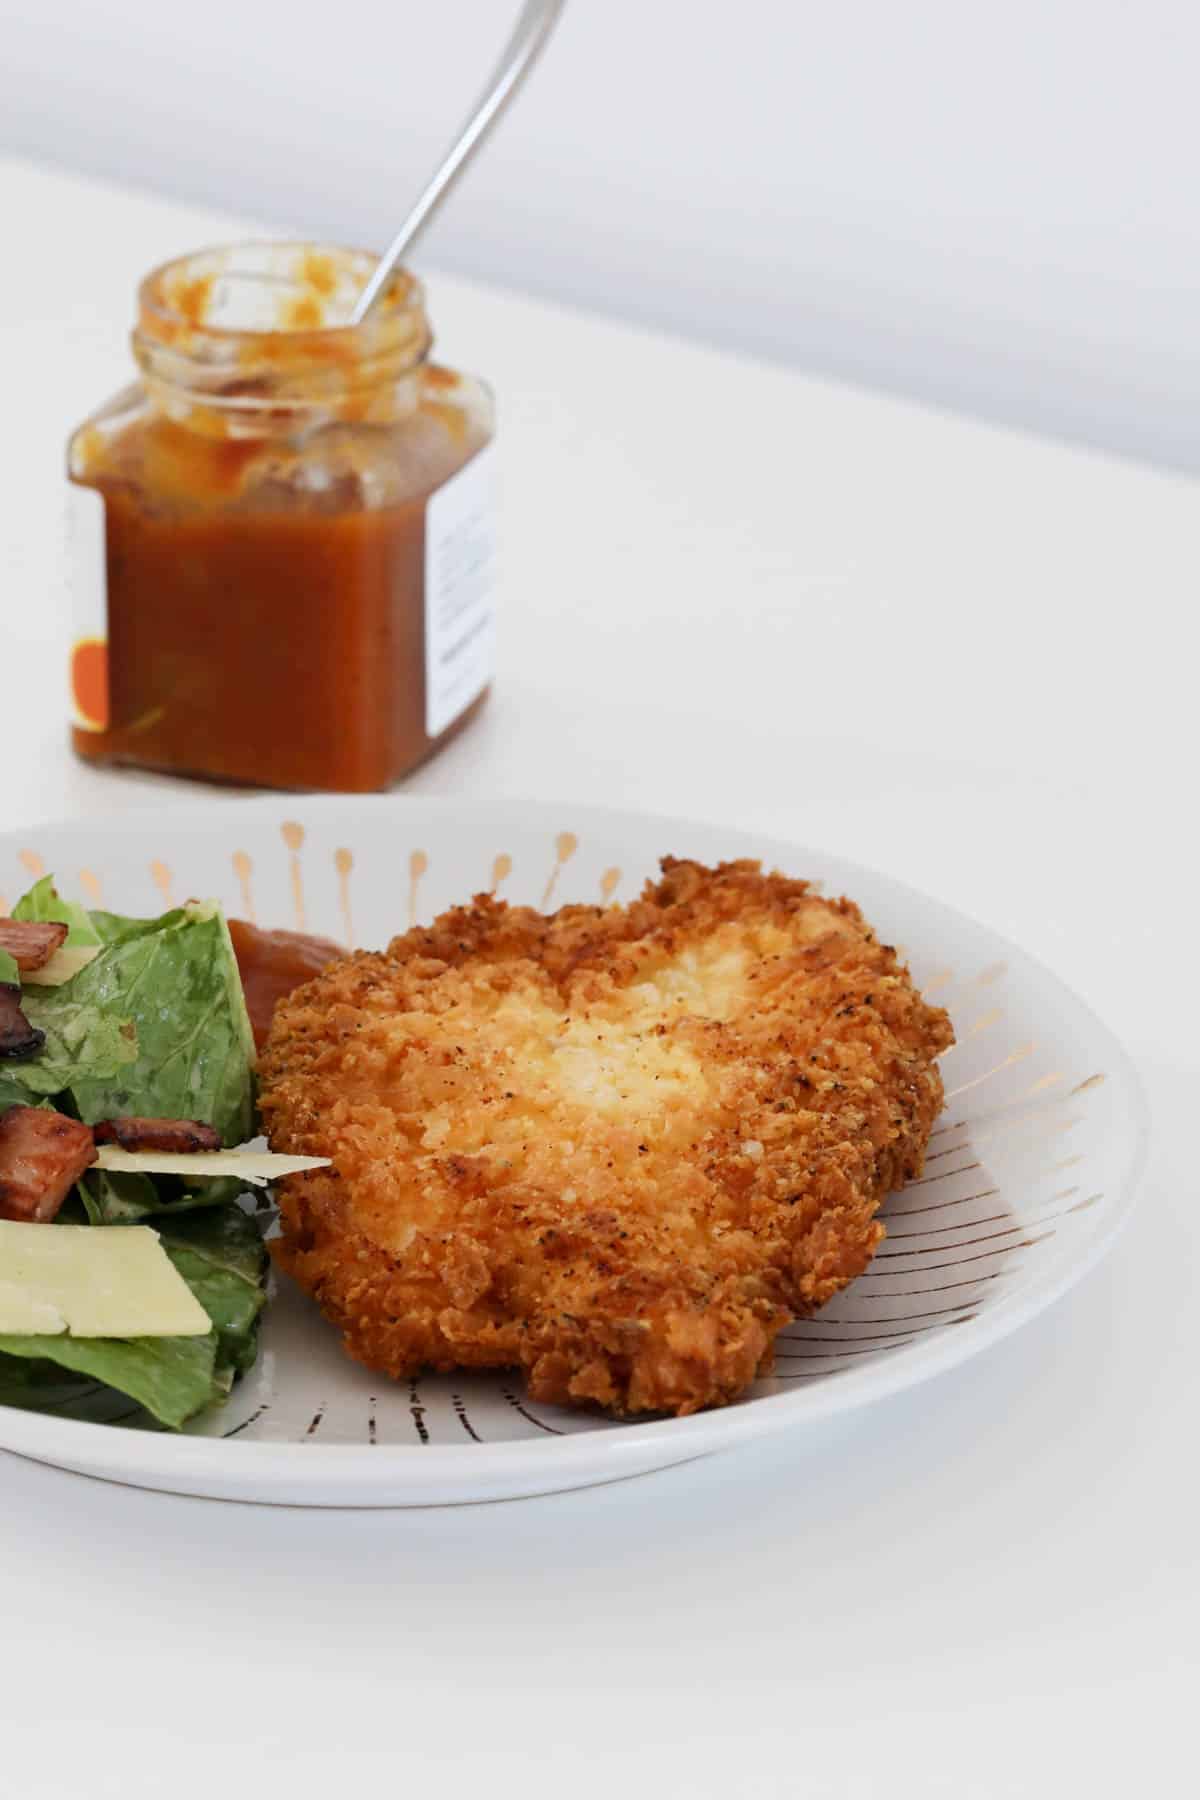 A jar of relish behind a crispy crumbed fillet served with salad.